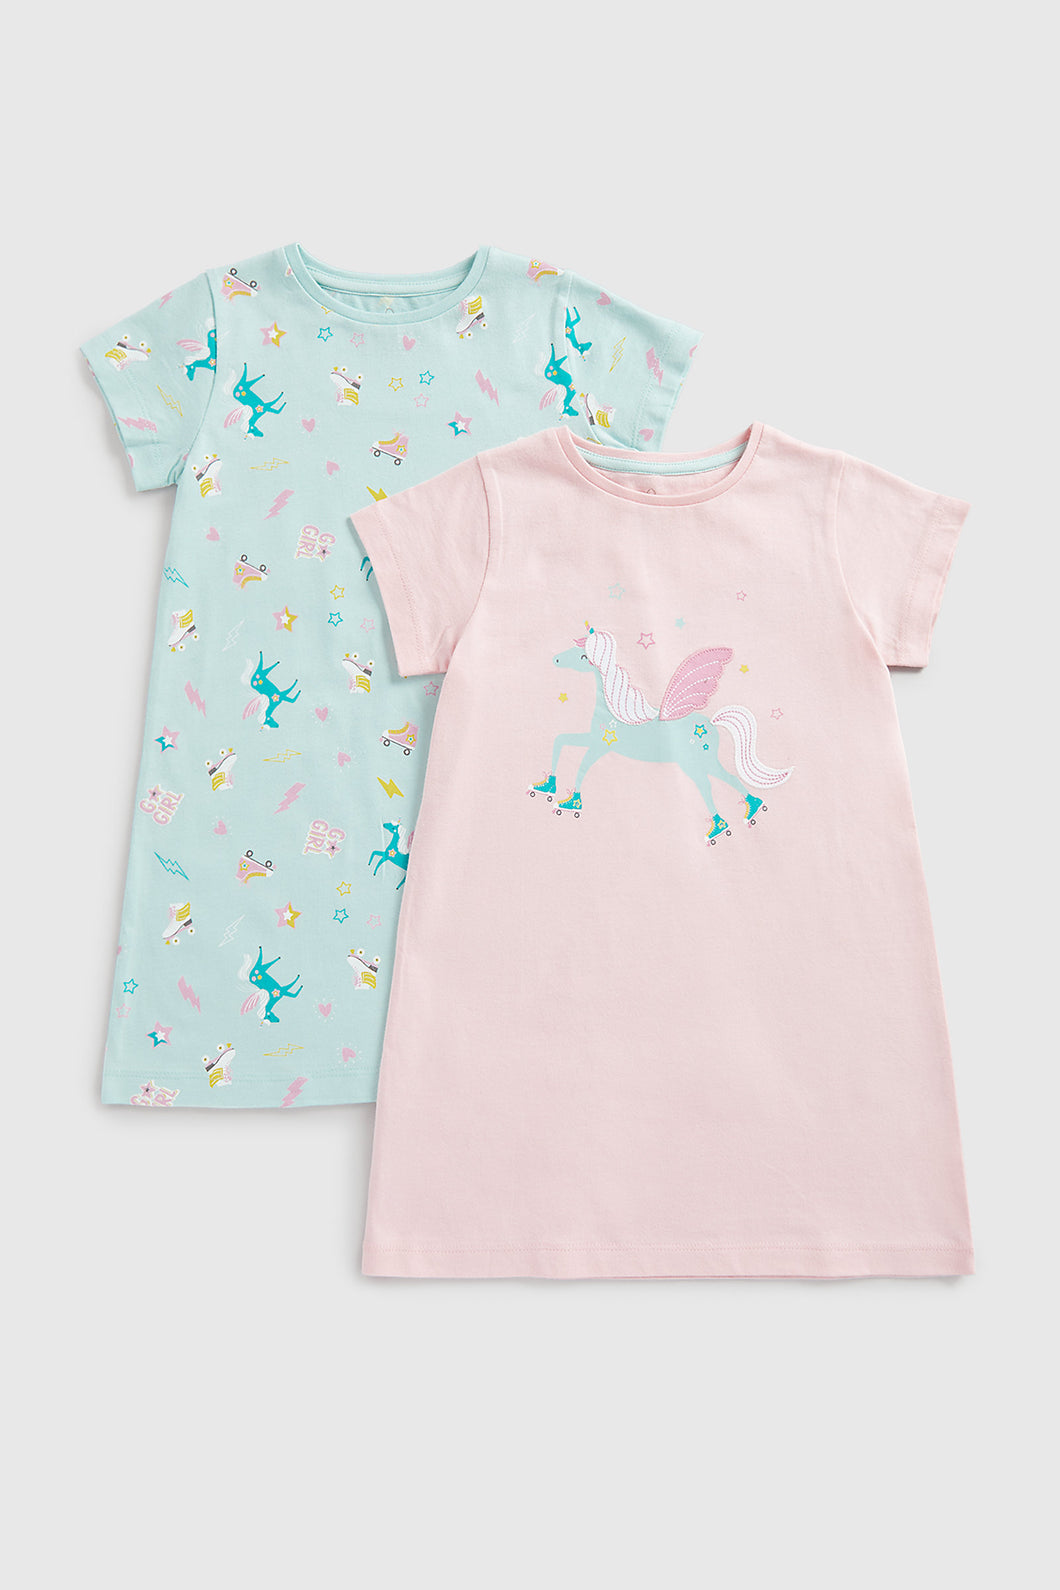 Mothercare Party Horse Nightdresses - 2 Pack